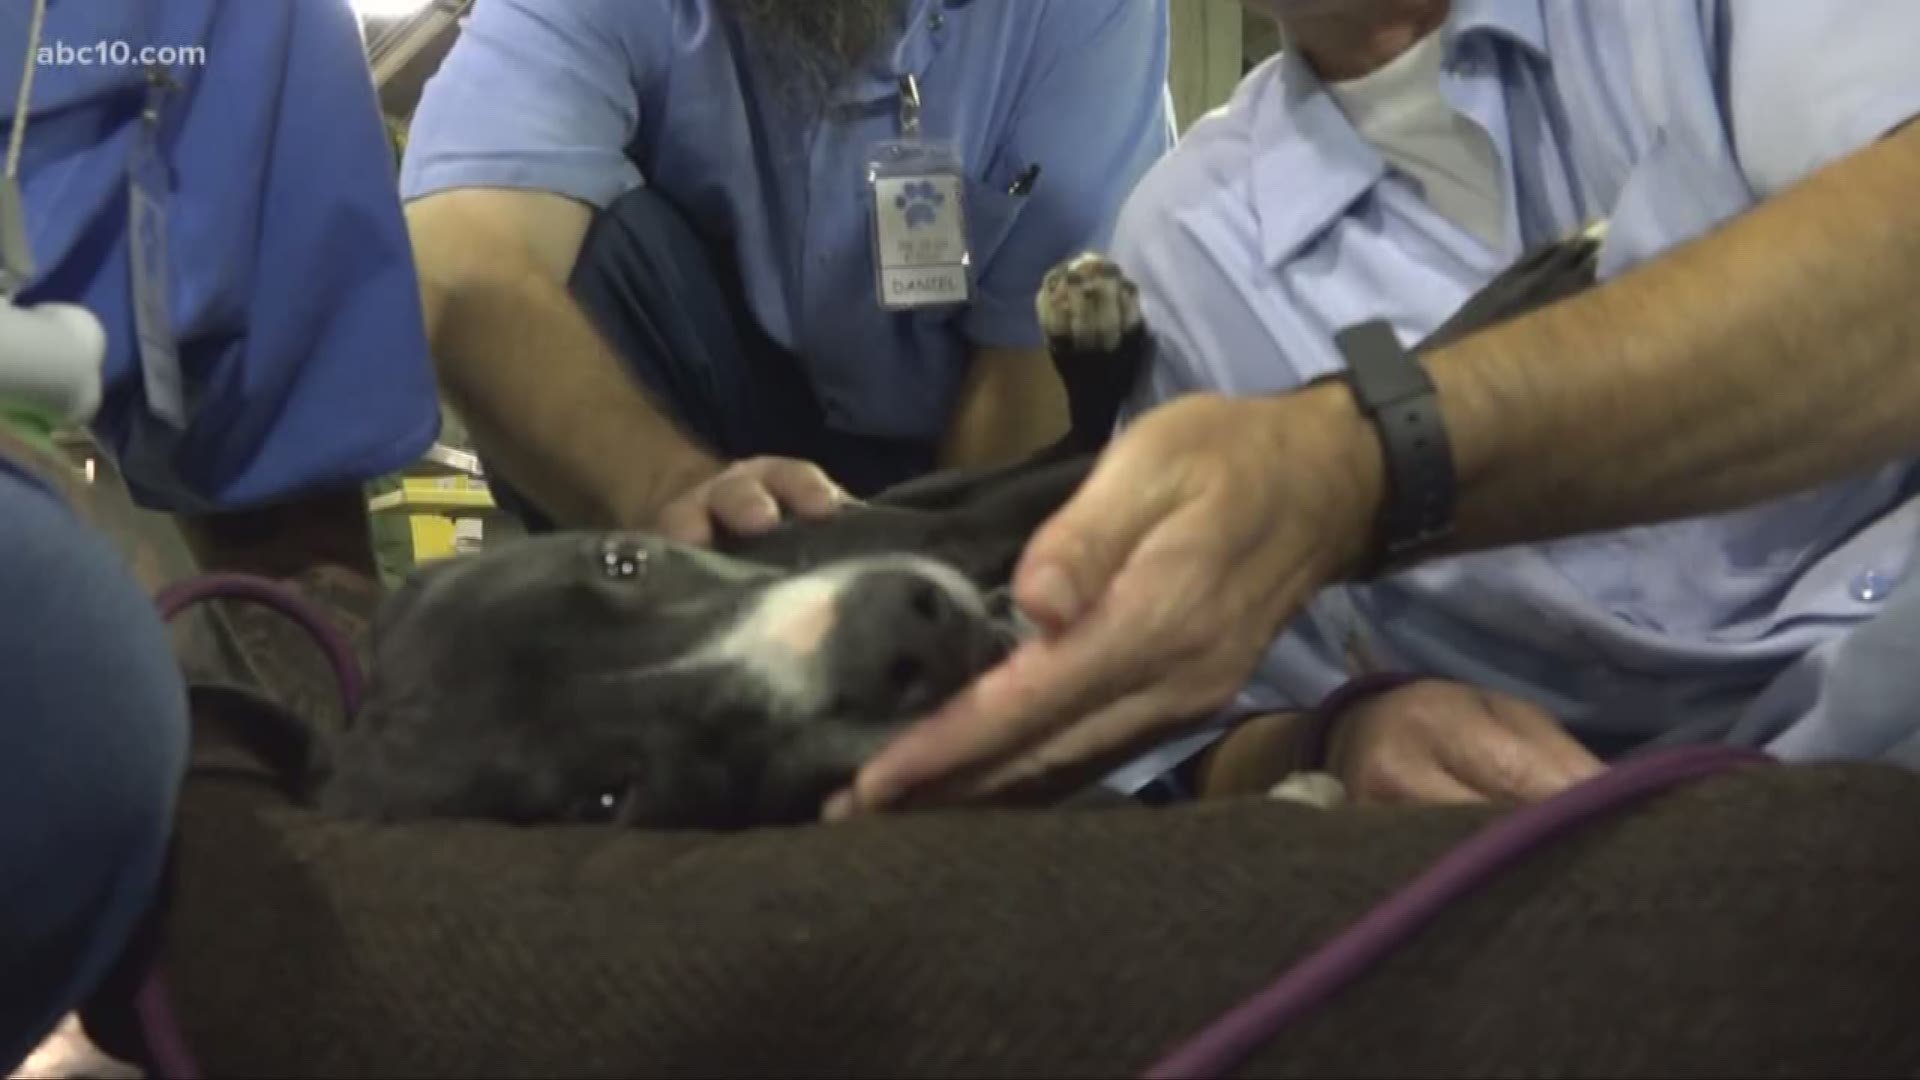 Inmates at the California Medical Facility that haven't seen dogs in years now have the chance to care for rescue dogs saved from kill shelters.